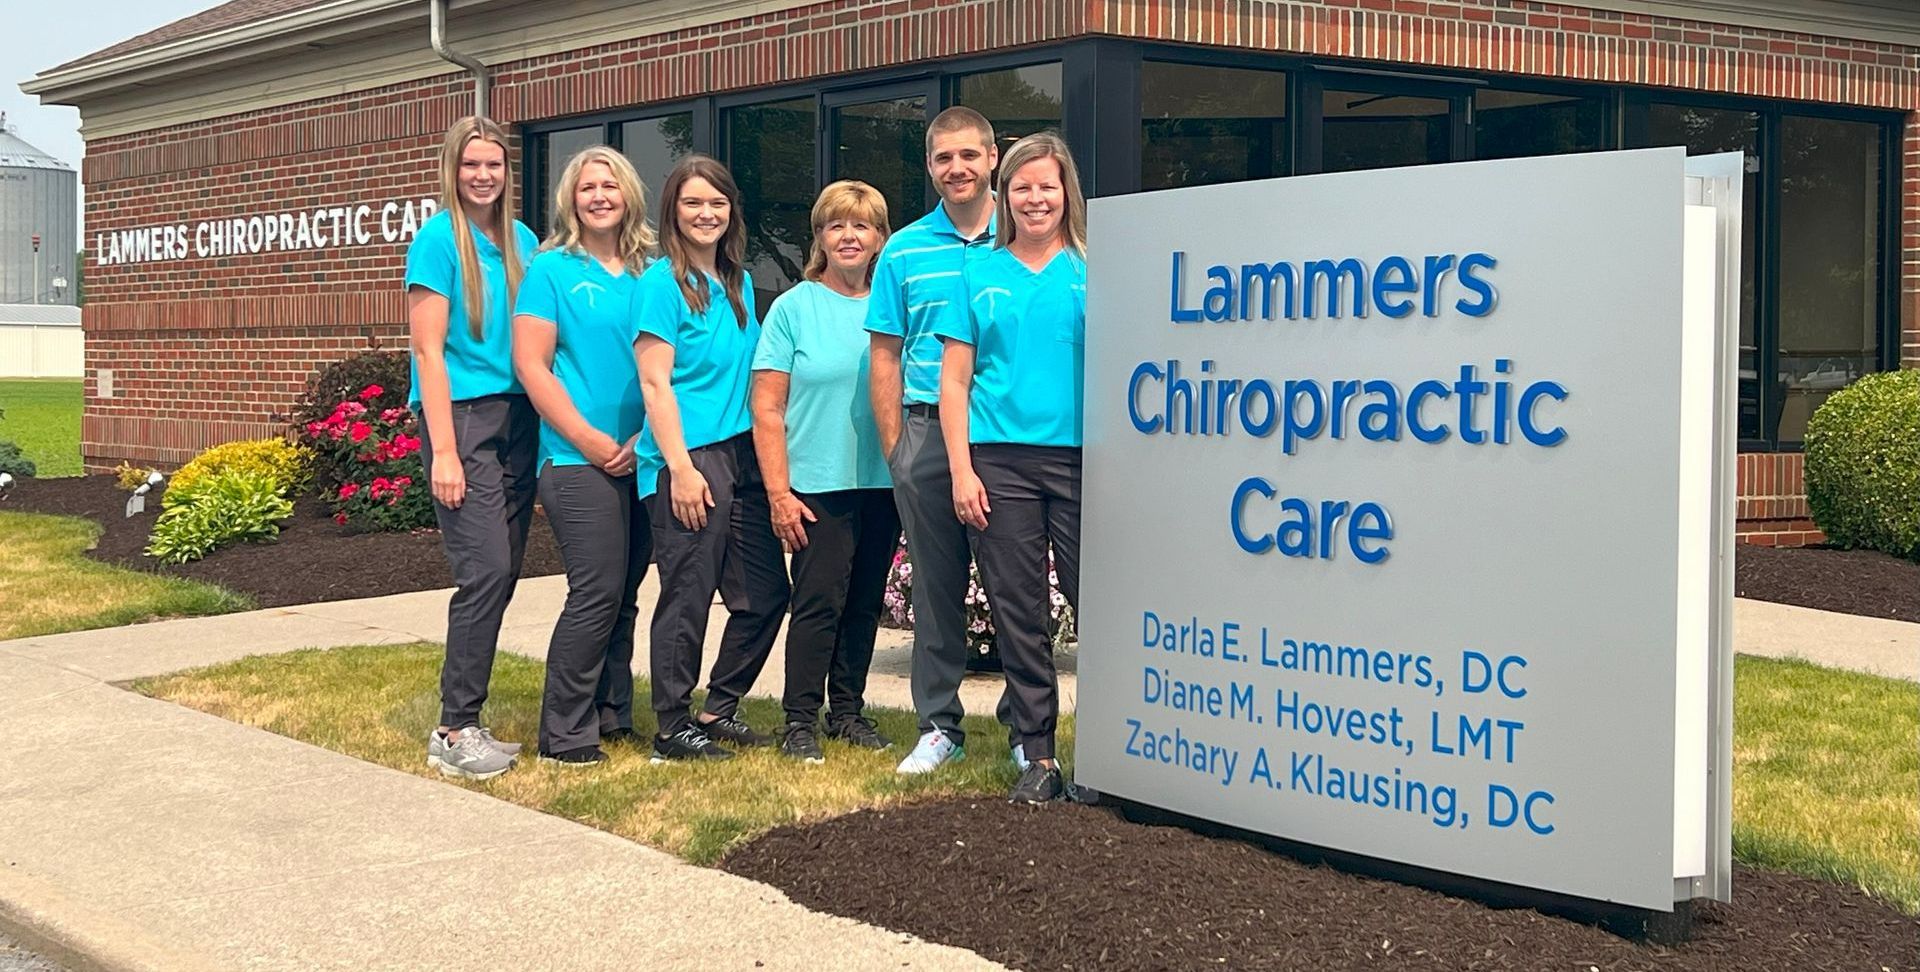 Lammers Chiropractic Care Team